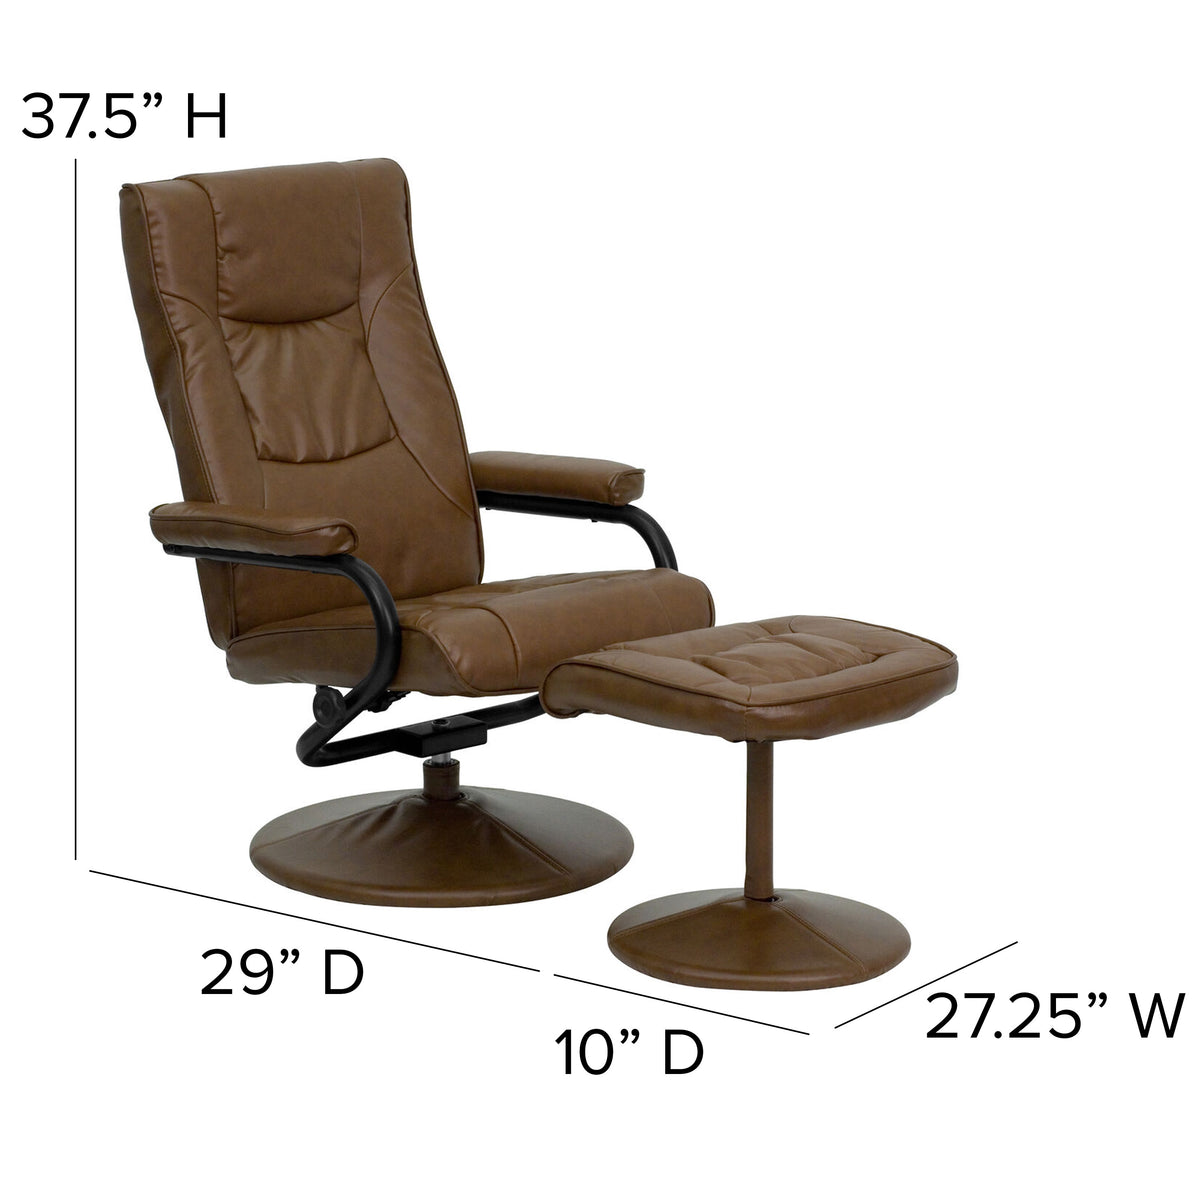 Palimino |#| Palimino LeatherSoft Multi-Position Recliner and Ottoman with Wrapped Base